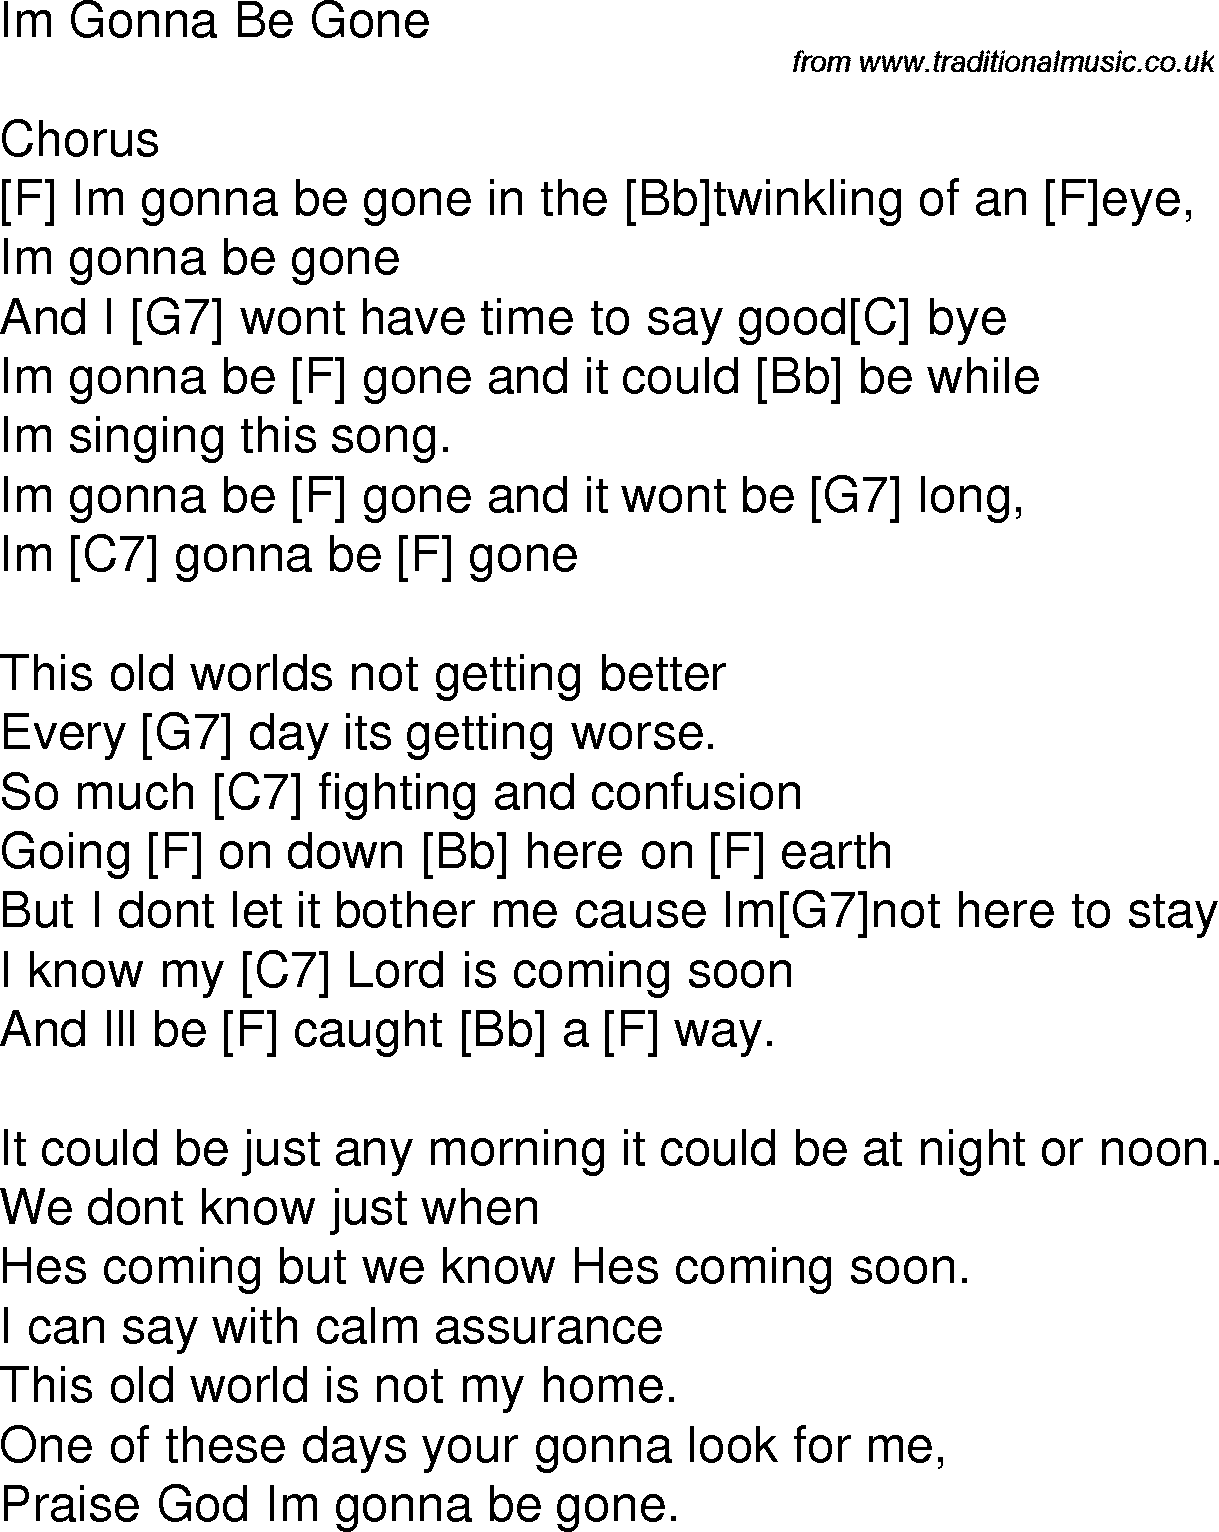 Old time song lyrics with chords for I'm Gonna Be Gone F